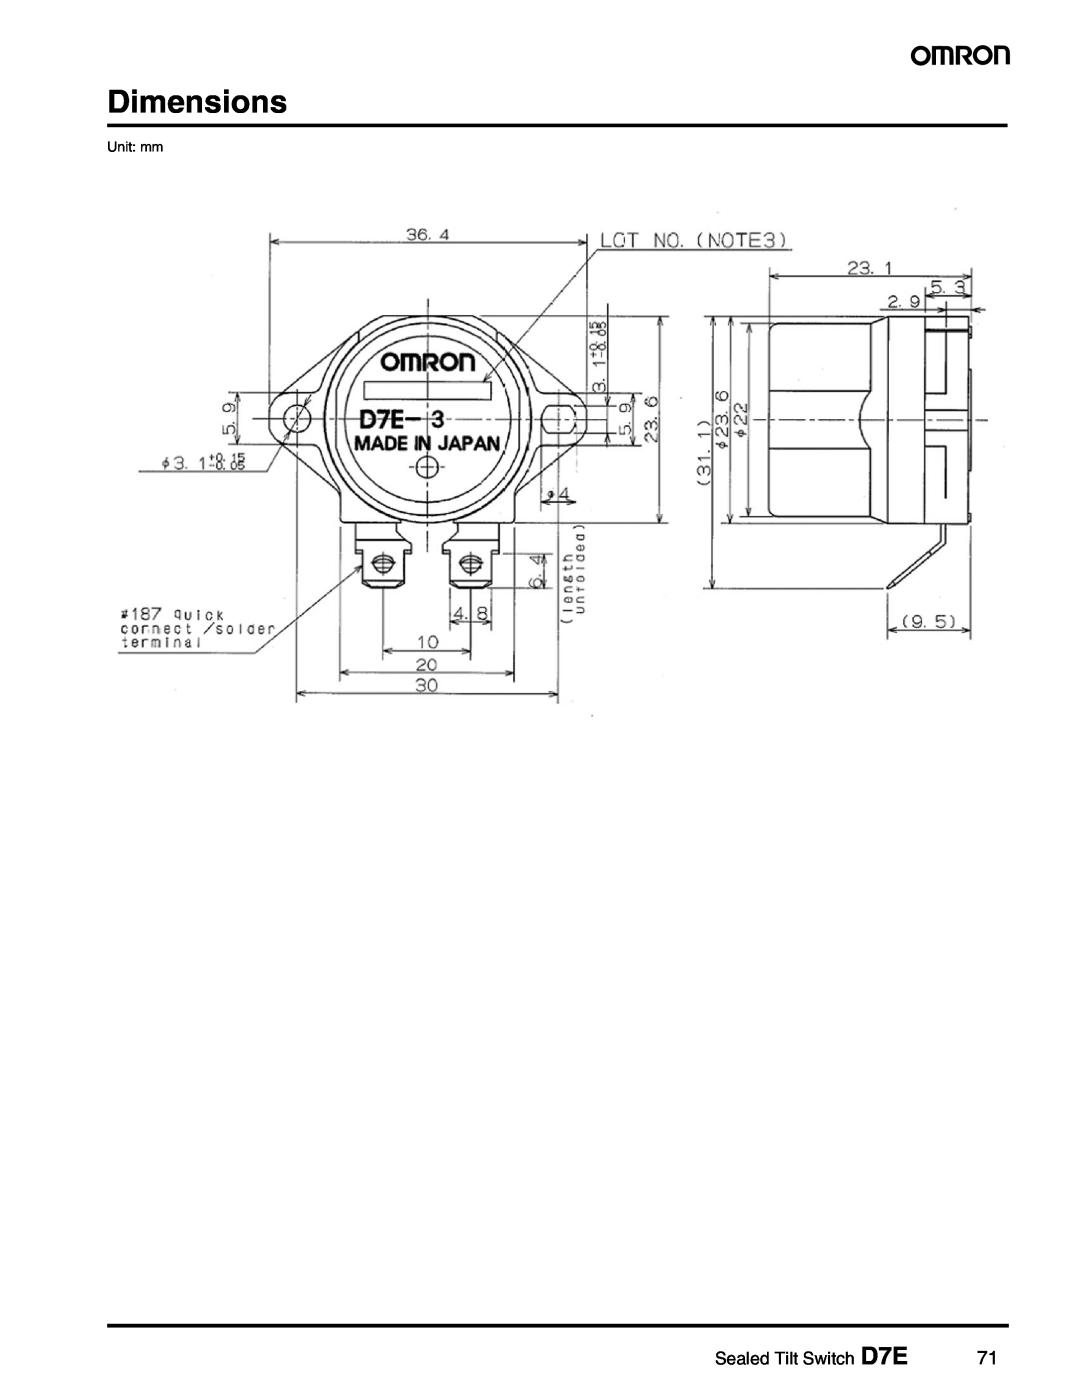 Omron Healthcare manual Dimensions, Sealed Tilt Switch D7E 